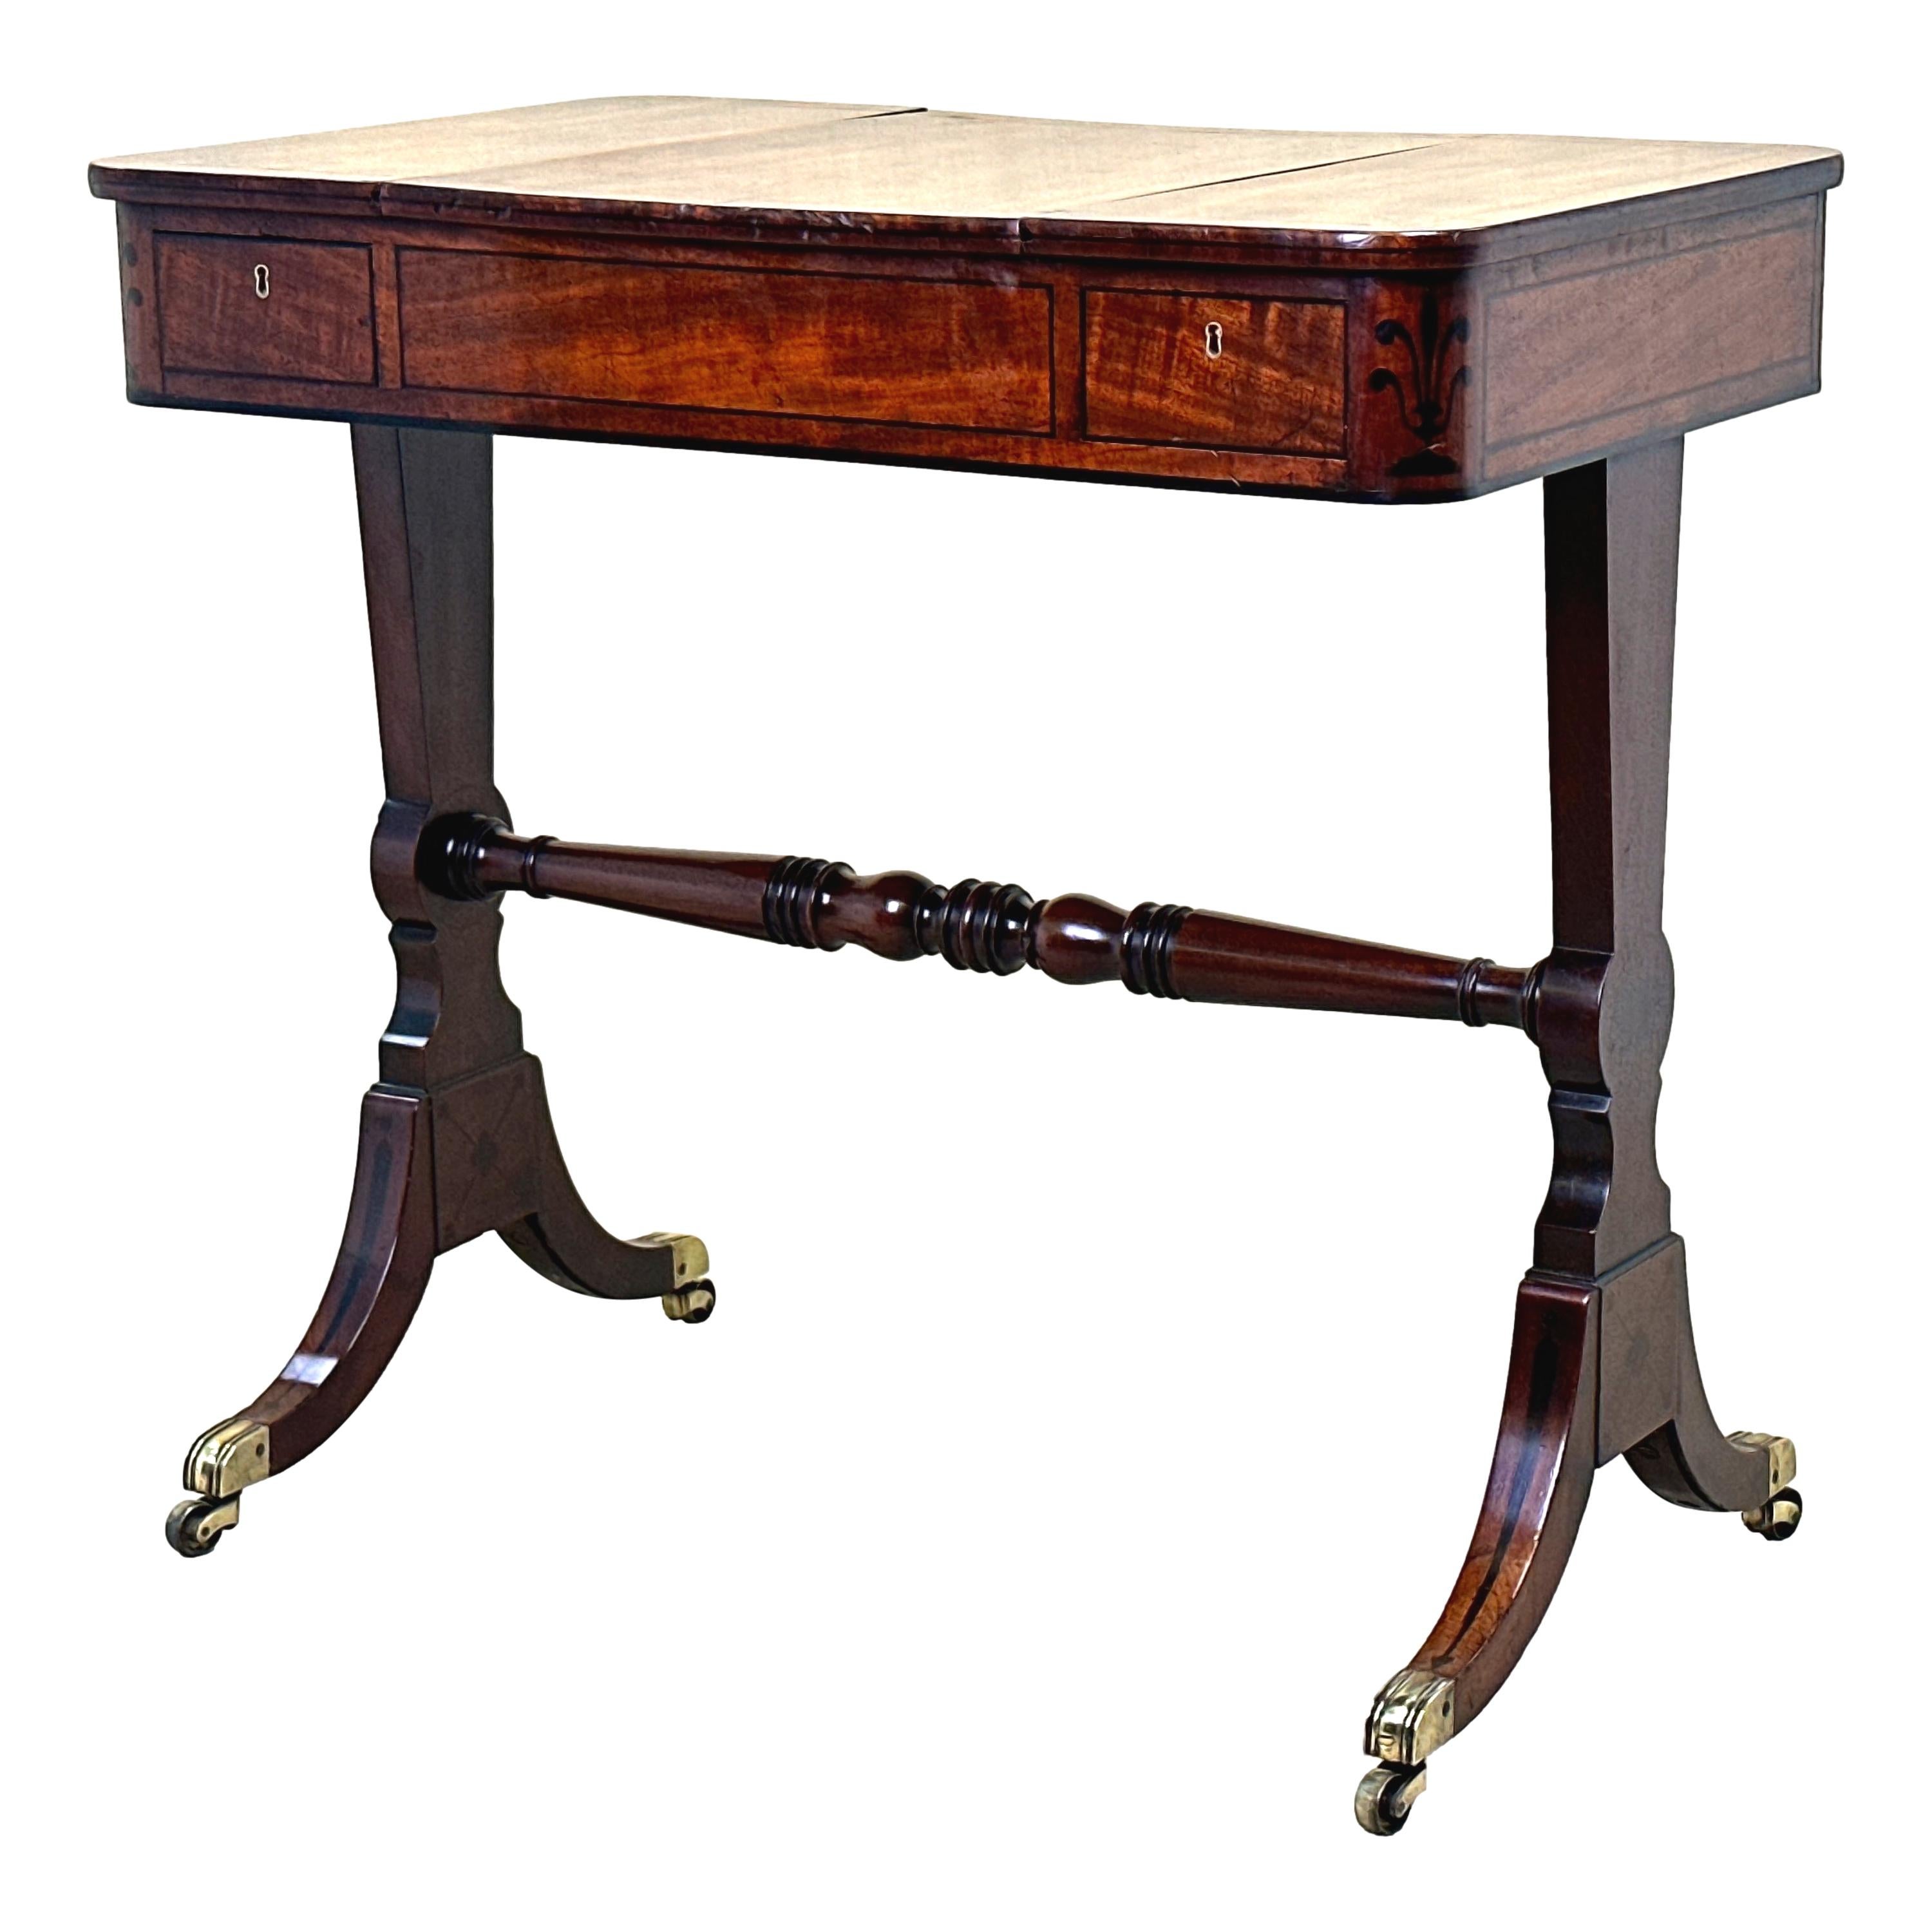 An Exceptionally Attractive George III Period Mahogany Games Table, Having Well Figured Top, The Reversible, Removable Central Slide Having Inlaid Chess Board To Back Enclosing Leather Backgammon Board Surface, Flanked By Two Frieze Drawers, Raised